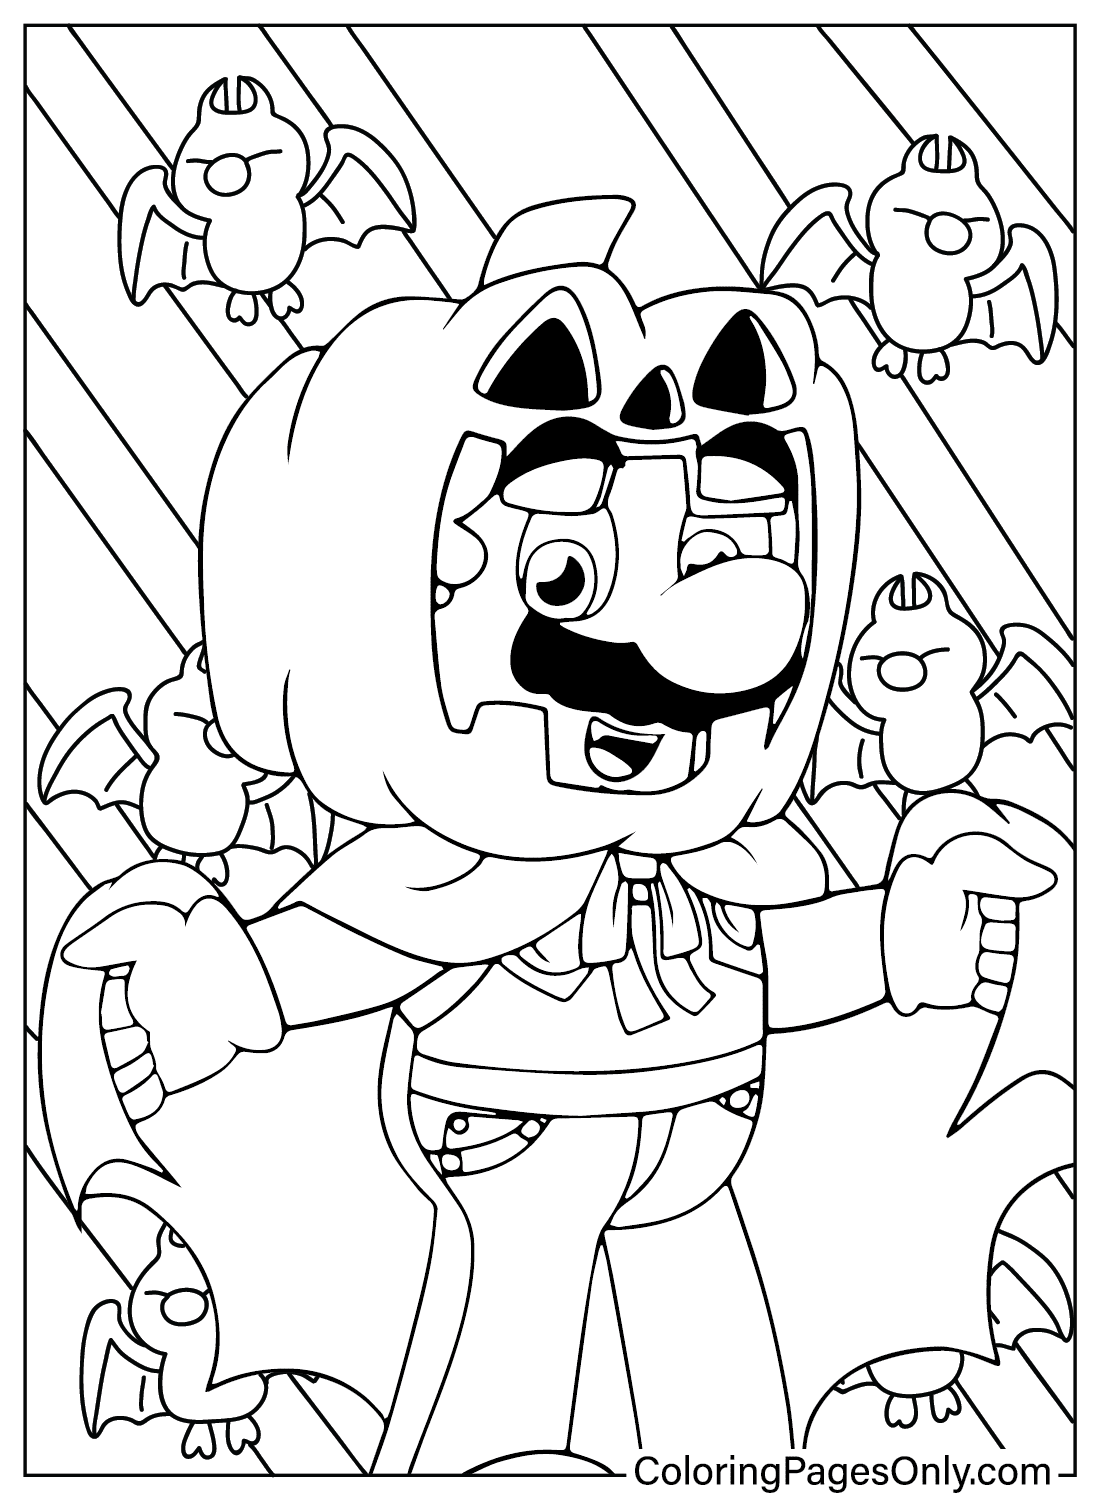 Mario Halloween Coloring Page PNG - Free Printable Coloring Pages